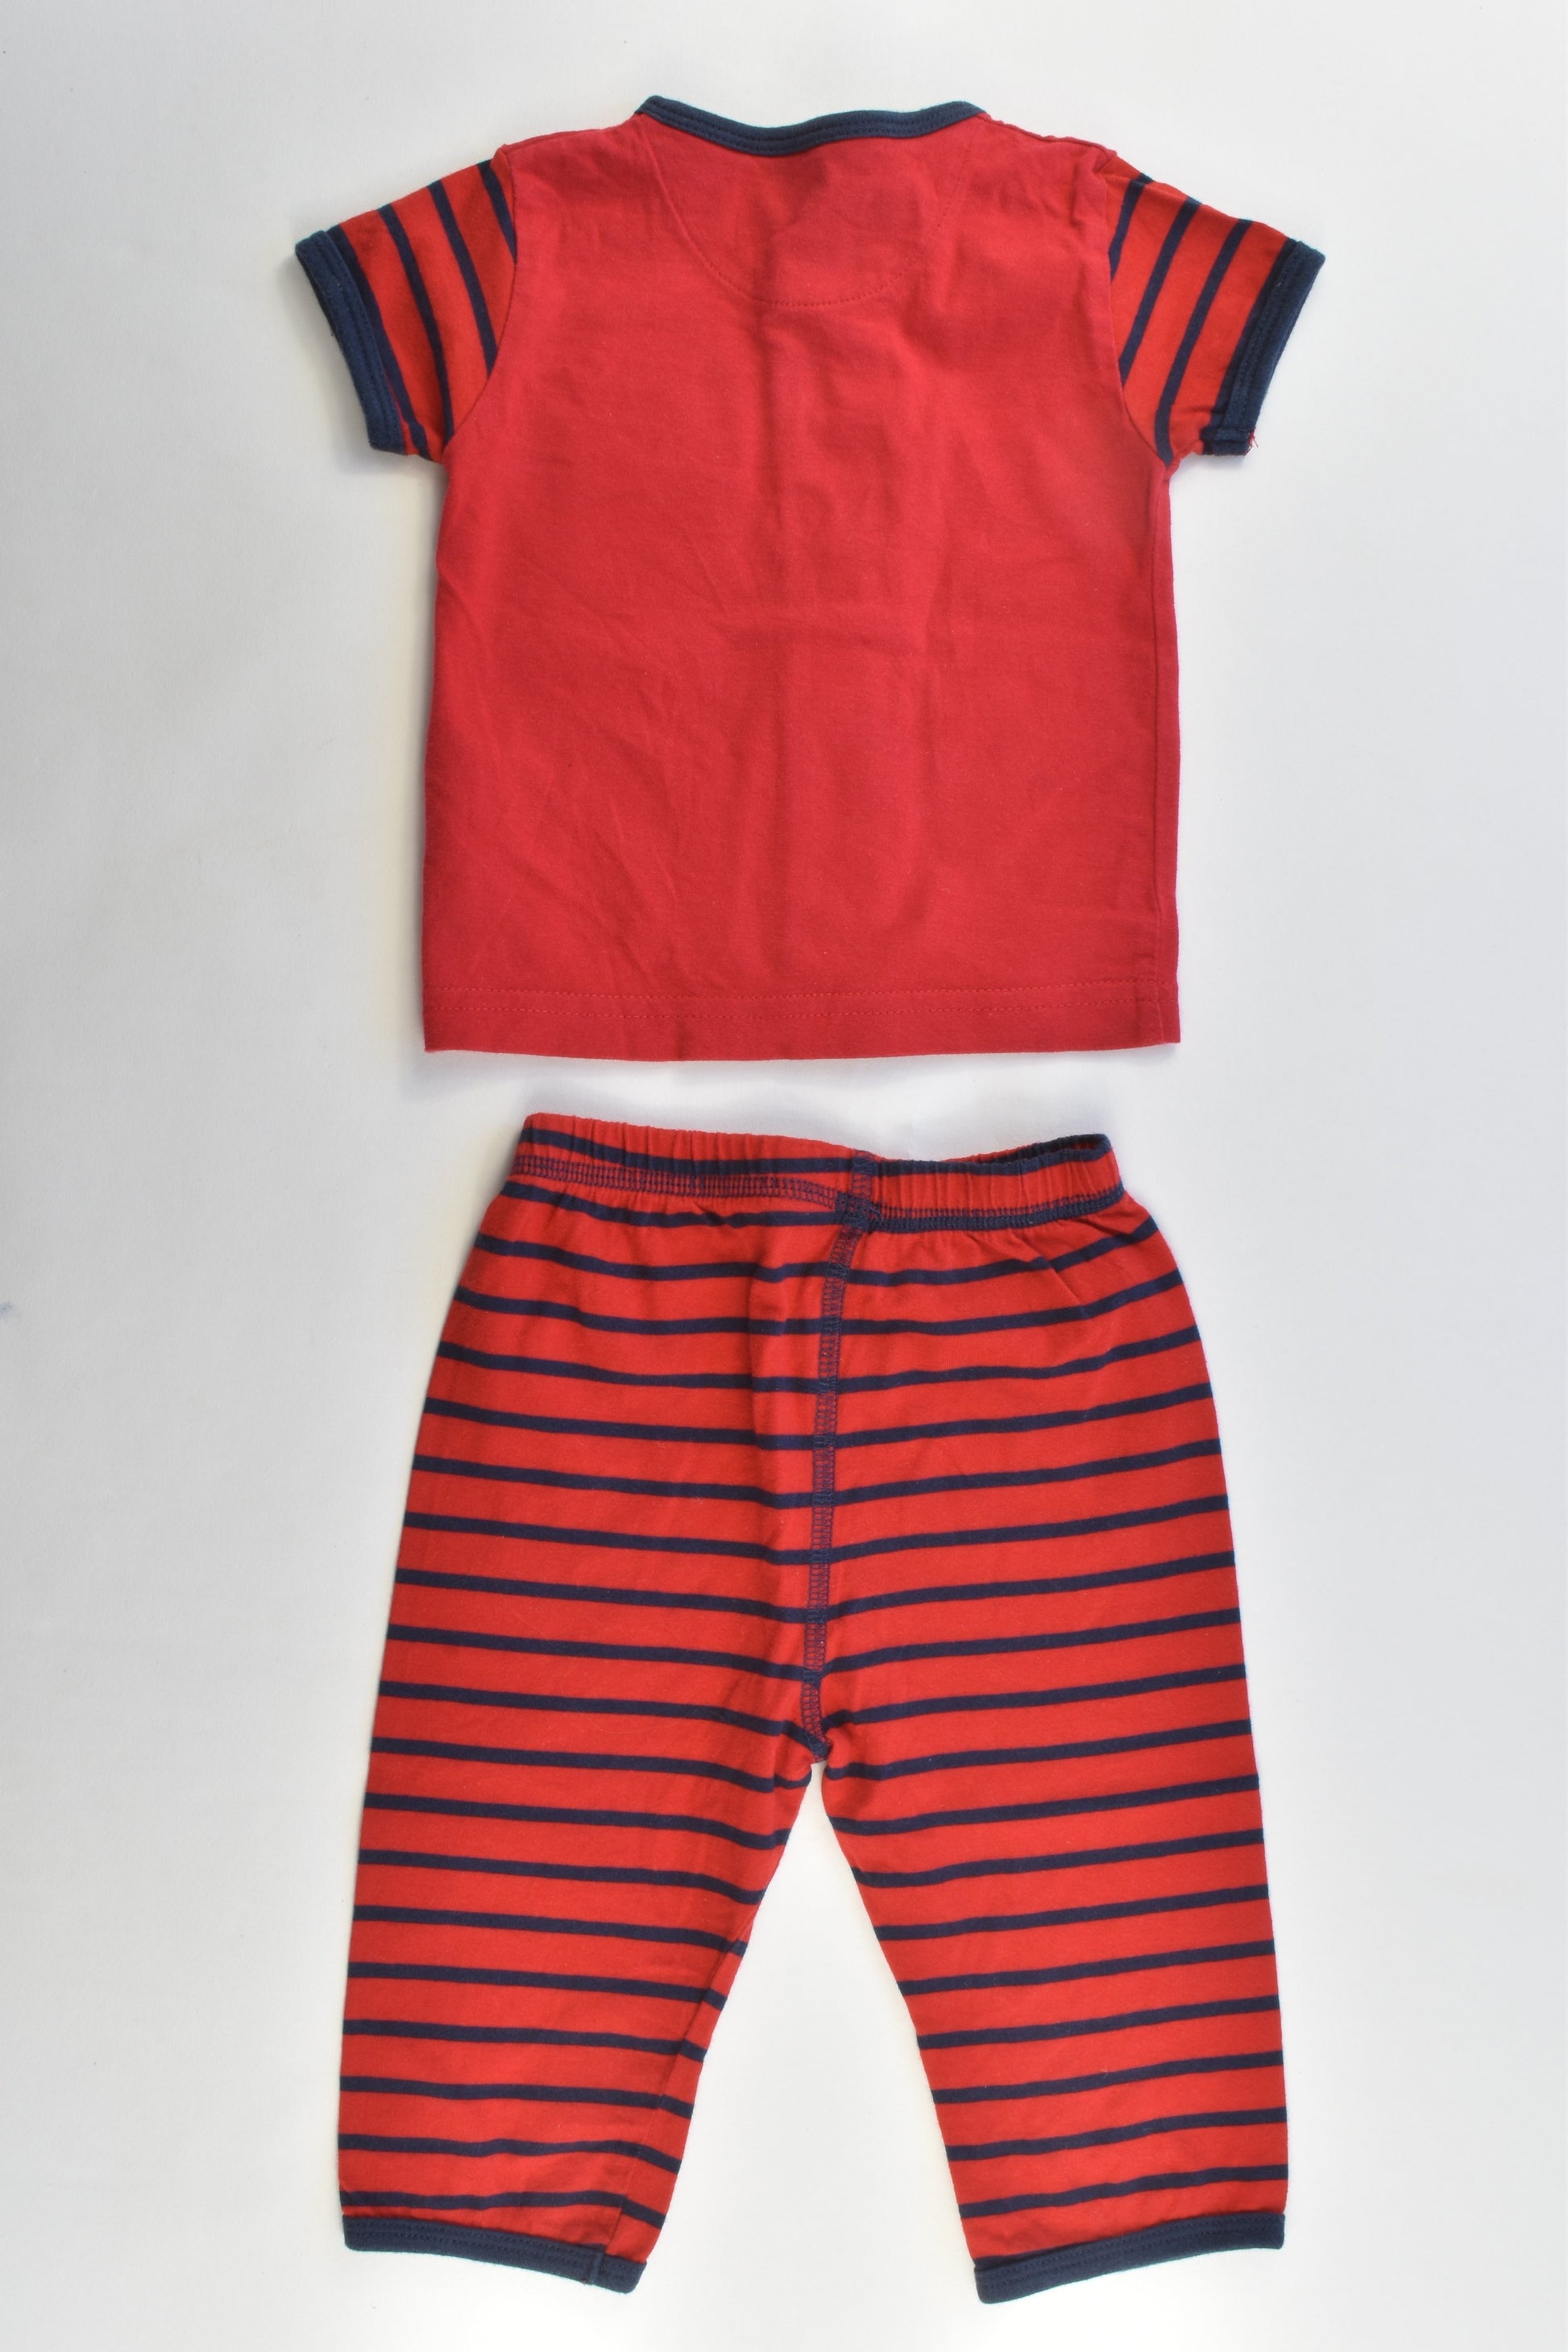 Mothercare Size 3-6 months (00) Red/Striped Bus Set